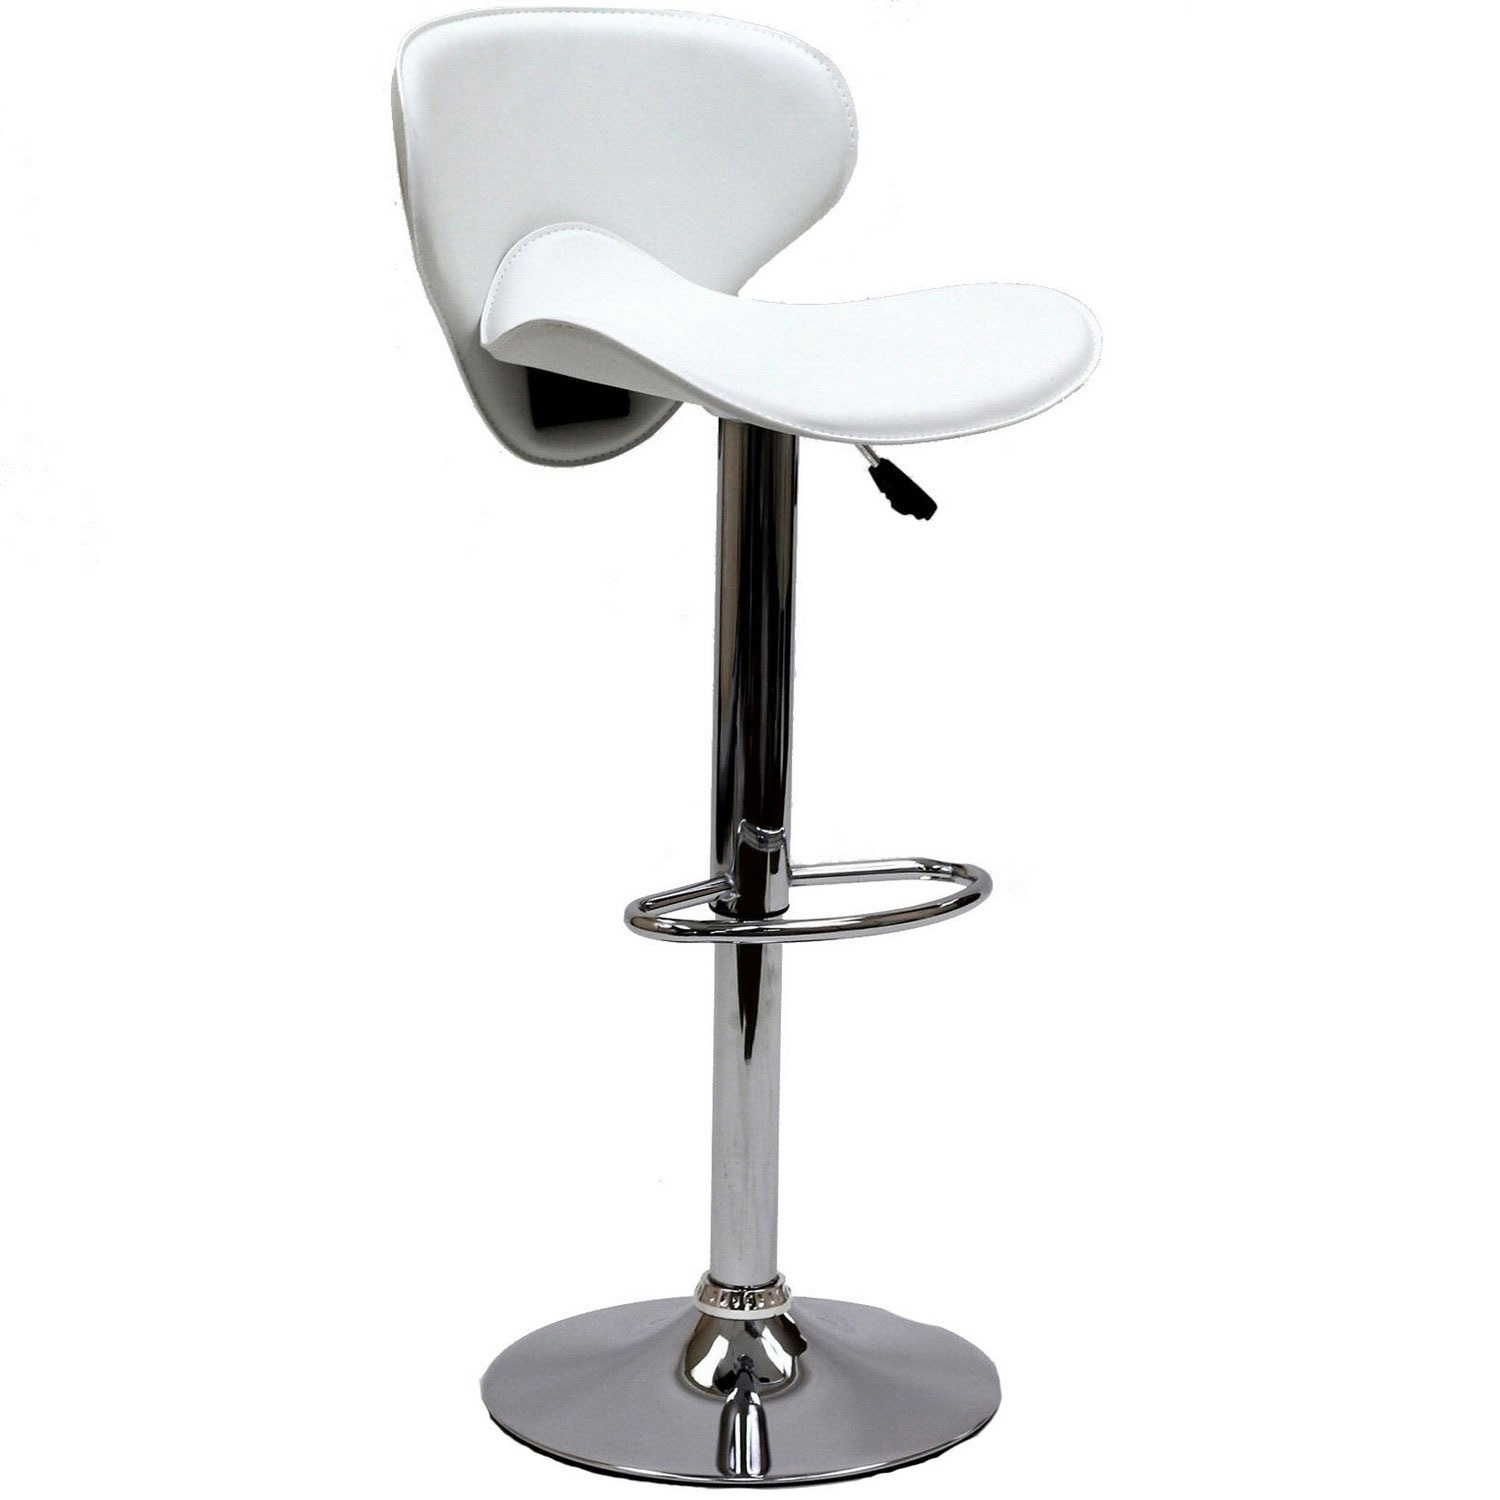 Modway Booster Bar Stool - White